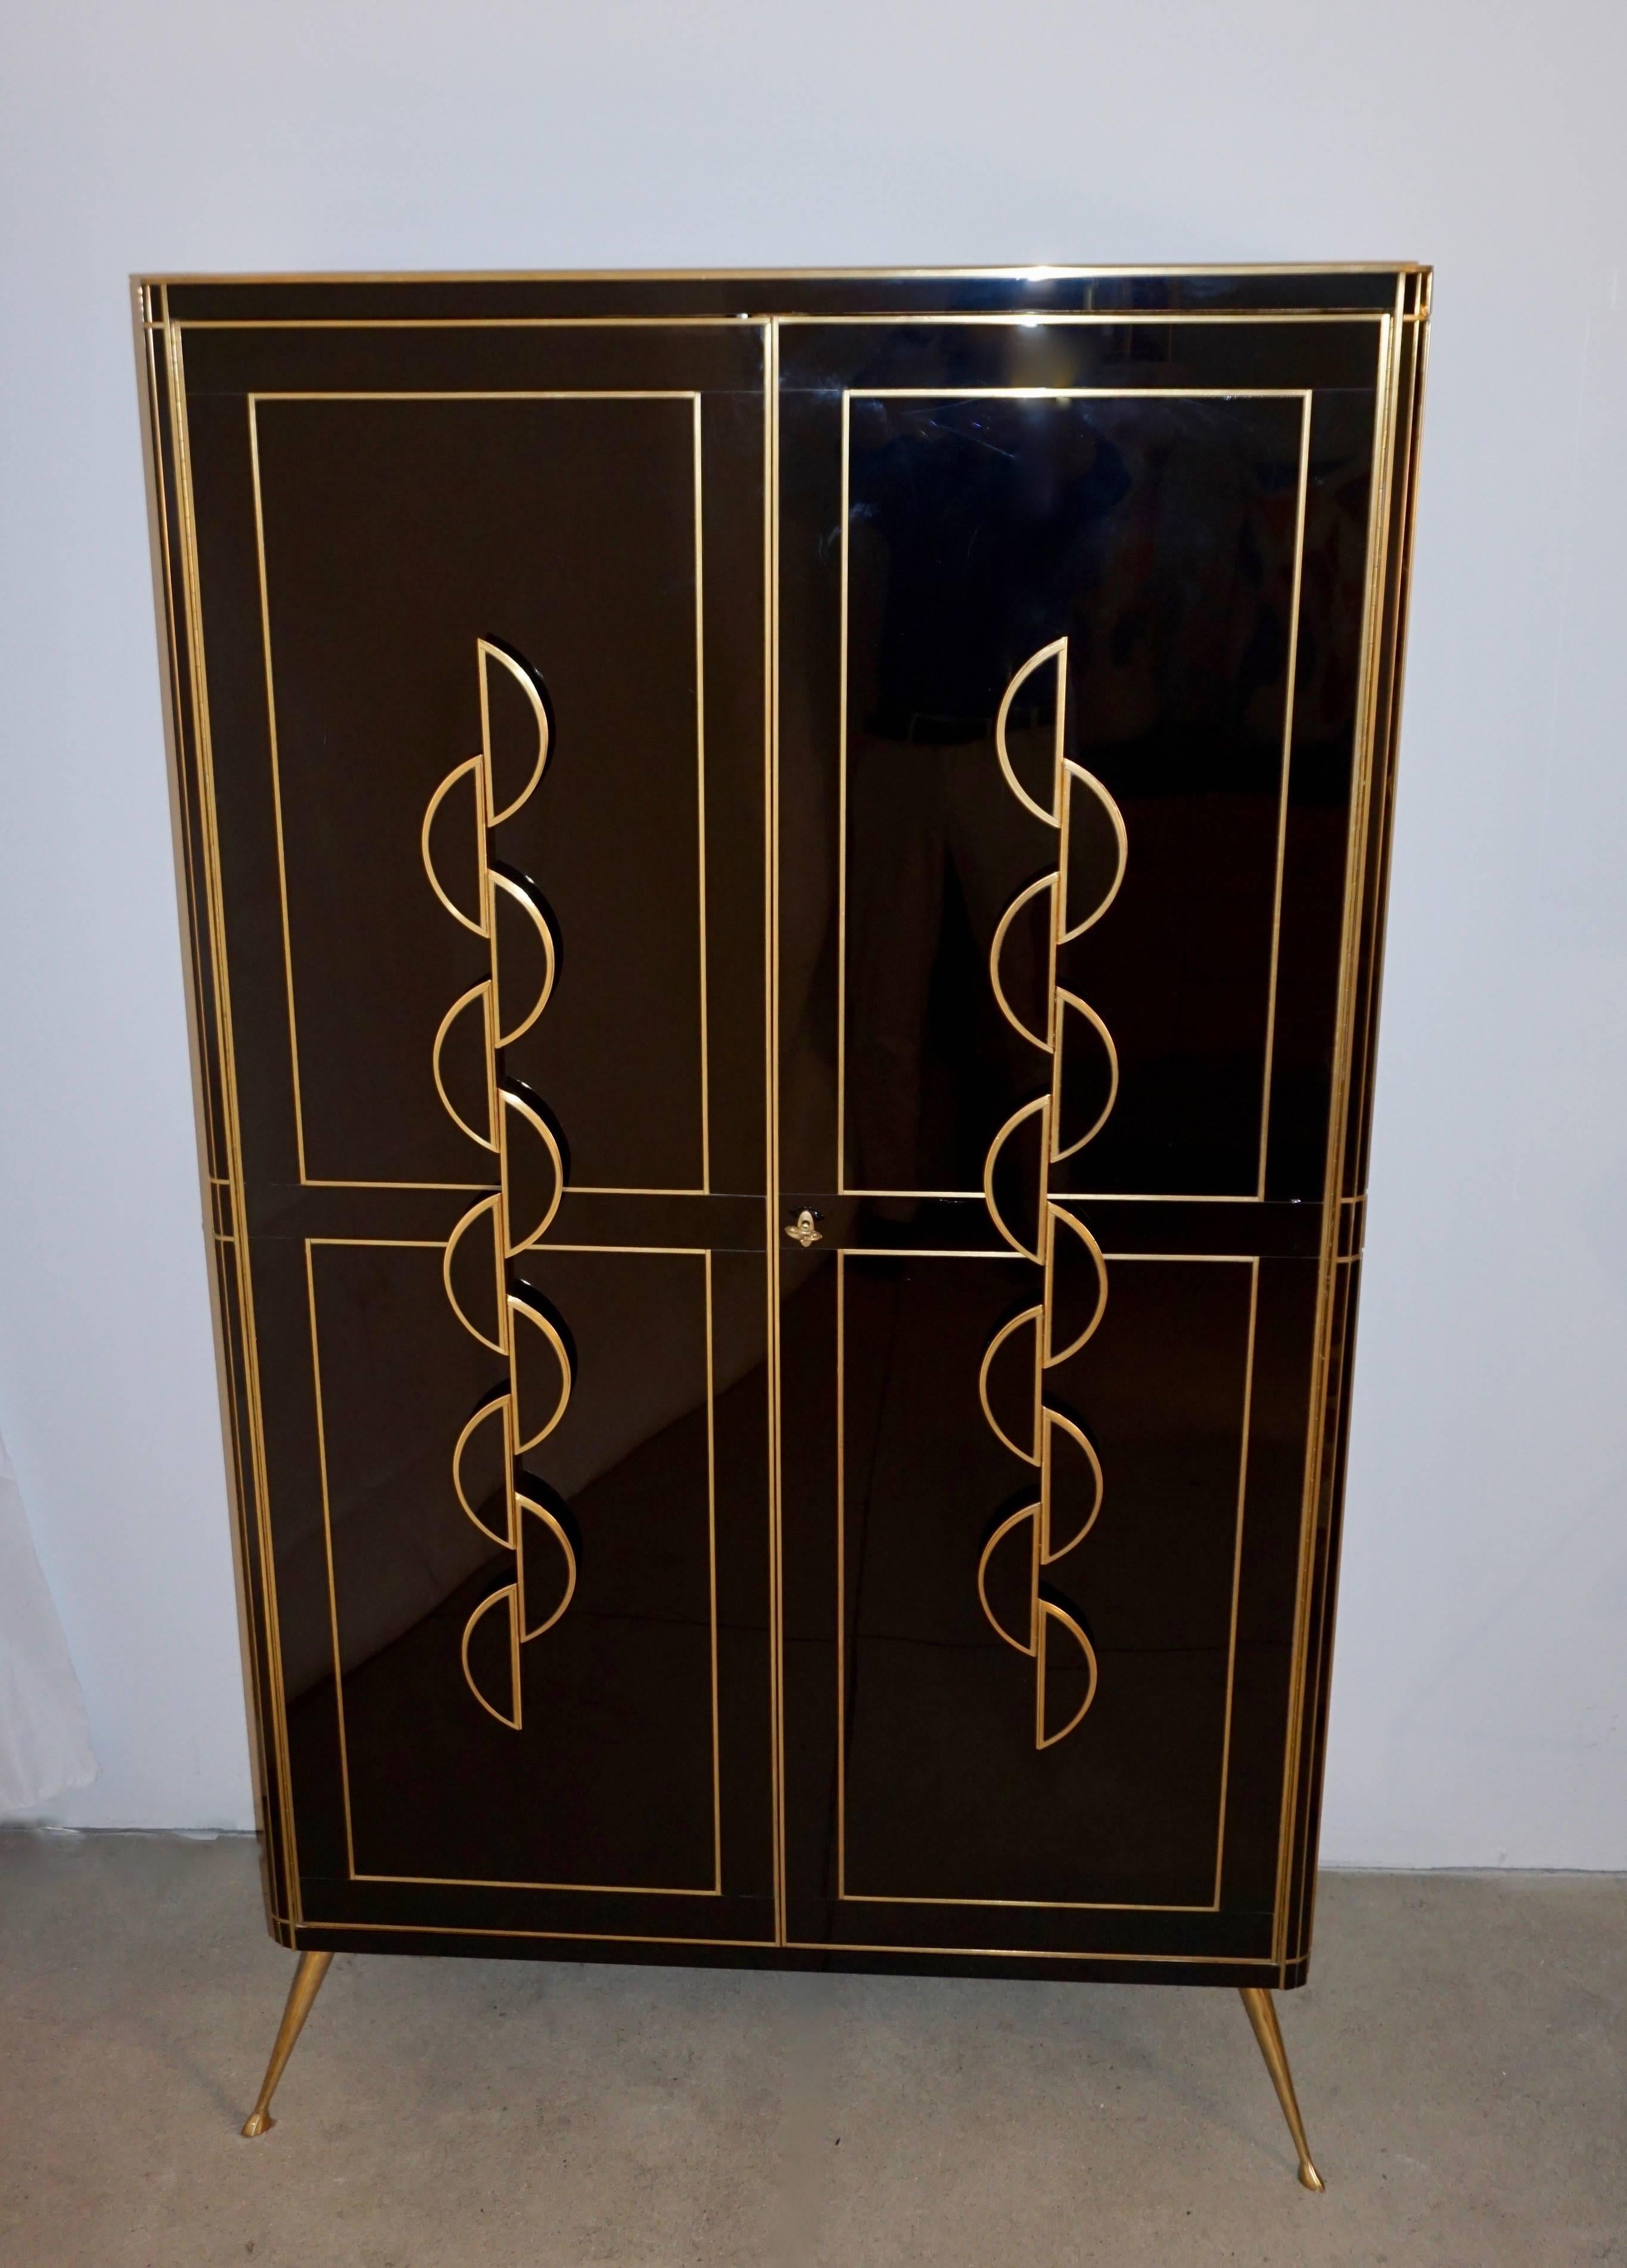 This late 1970s one-of-a kind Italian cabinet, from the North of Italy, entirely handmade, has a surround and top surface covered in black glass highlighted with brass inlays. High quality of execution and attention to details with rounded corners,